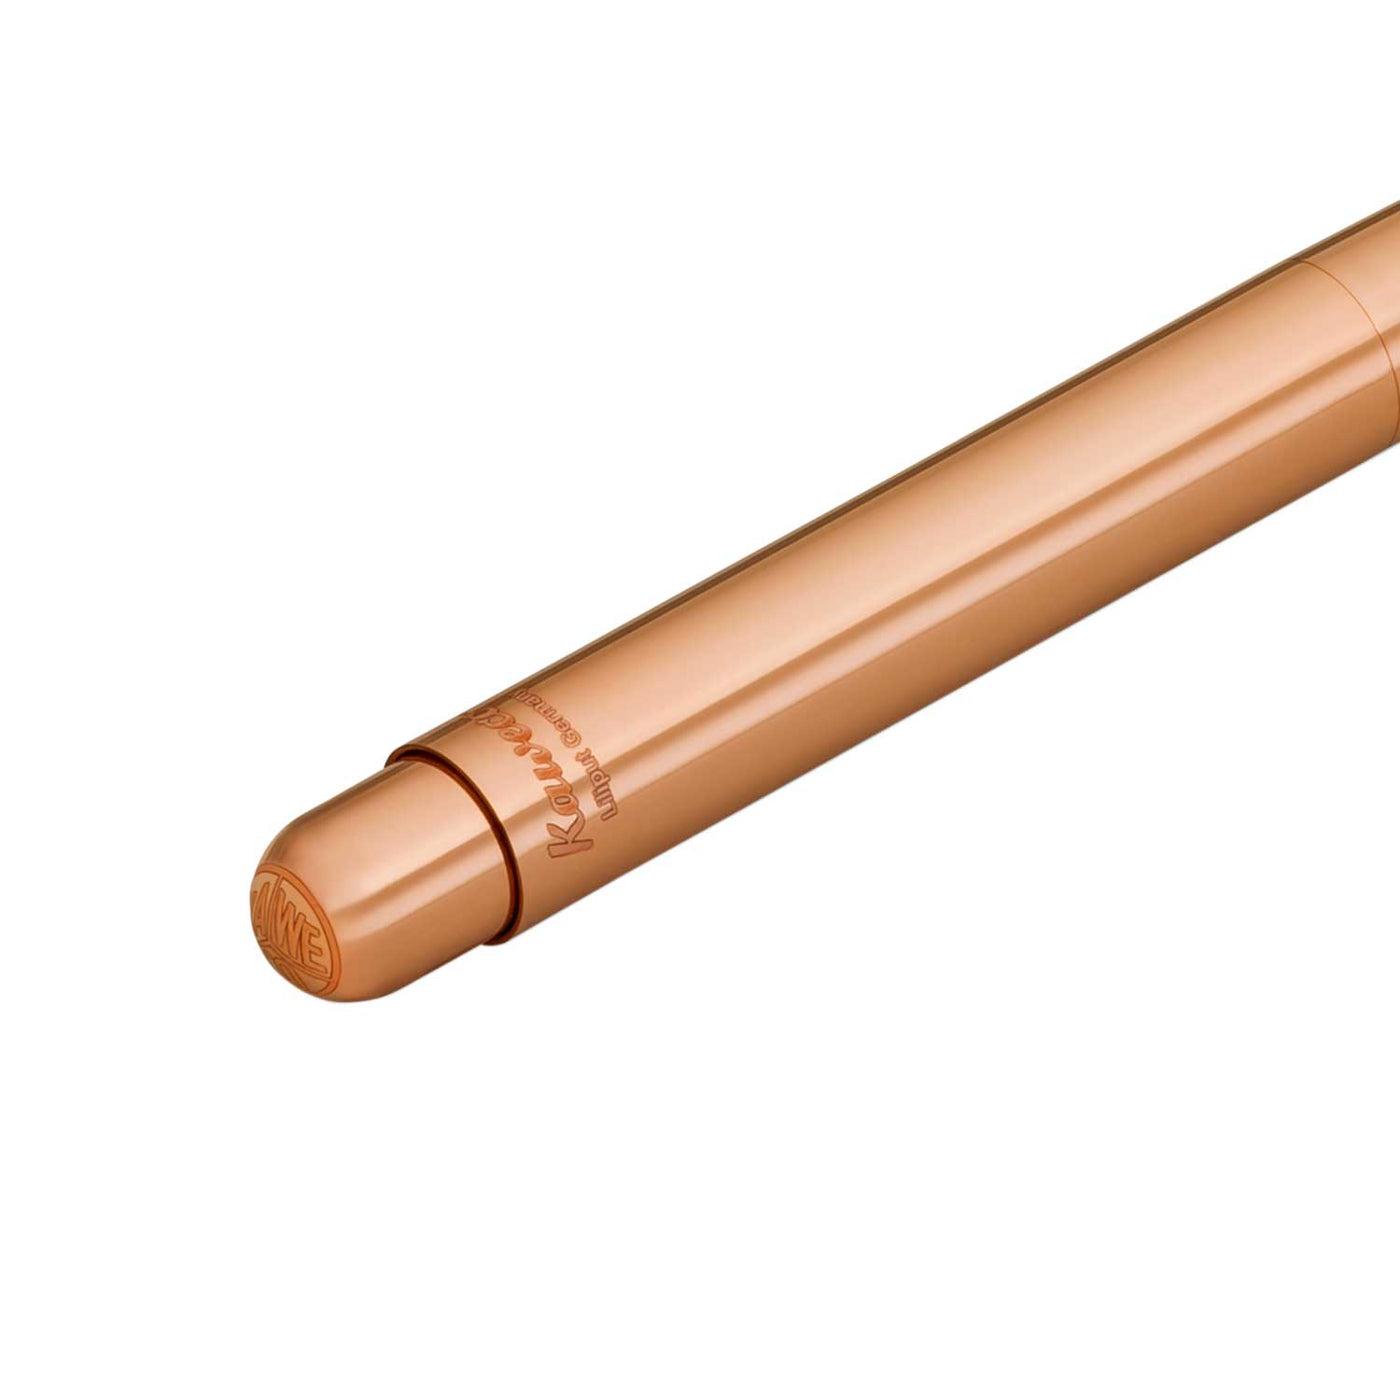 Kaweco Liliput Ball Pen with Optional Clip - Copper 3